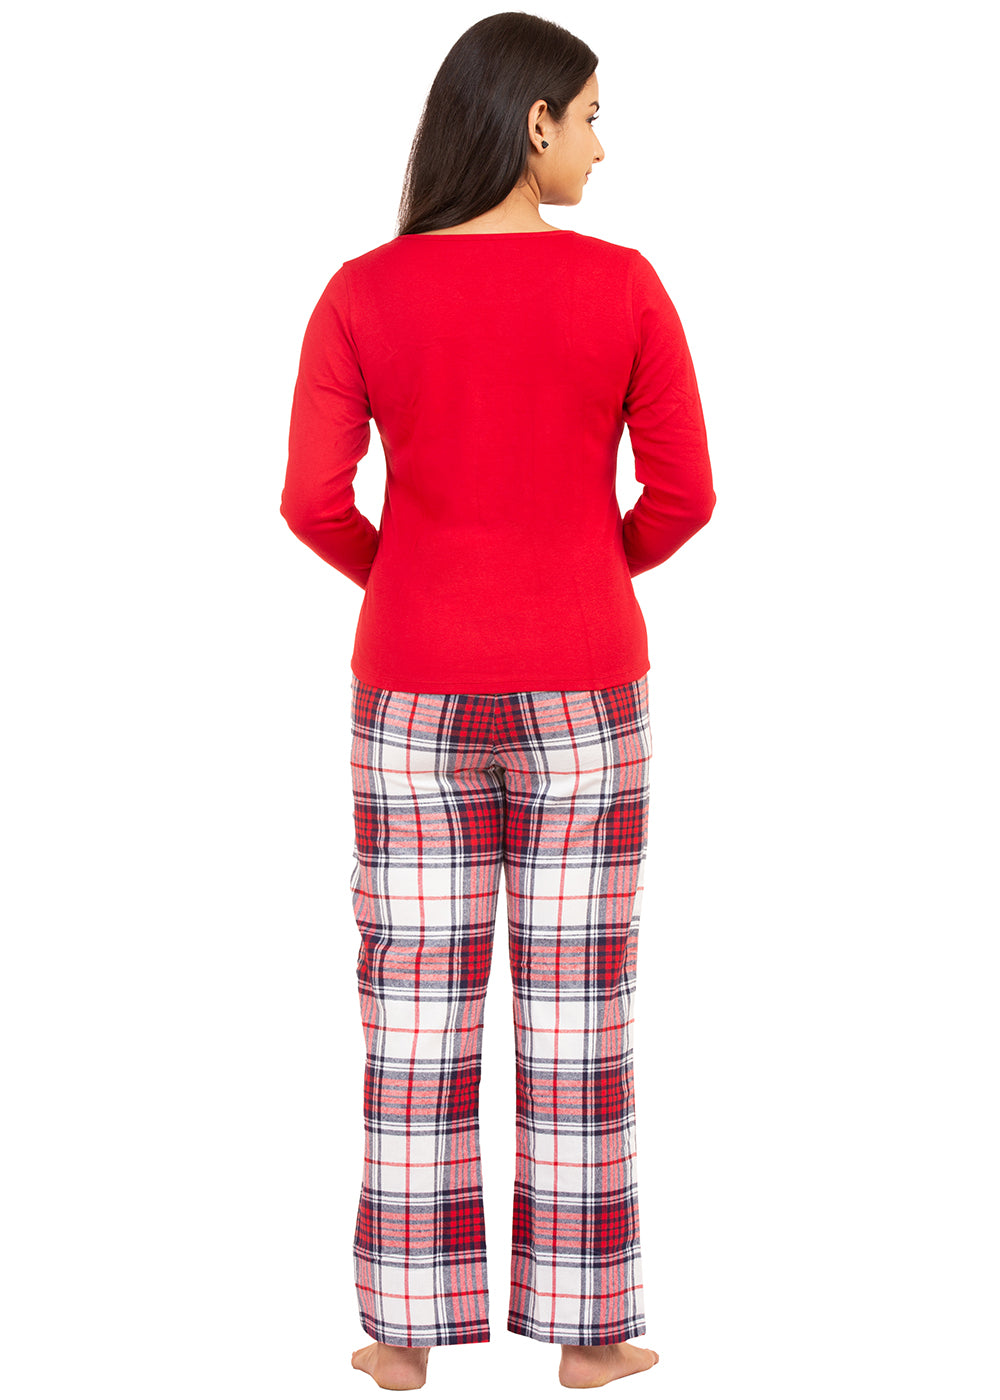 Pyjama Set for Women-Red Checked